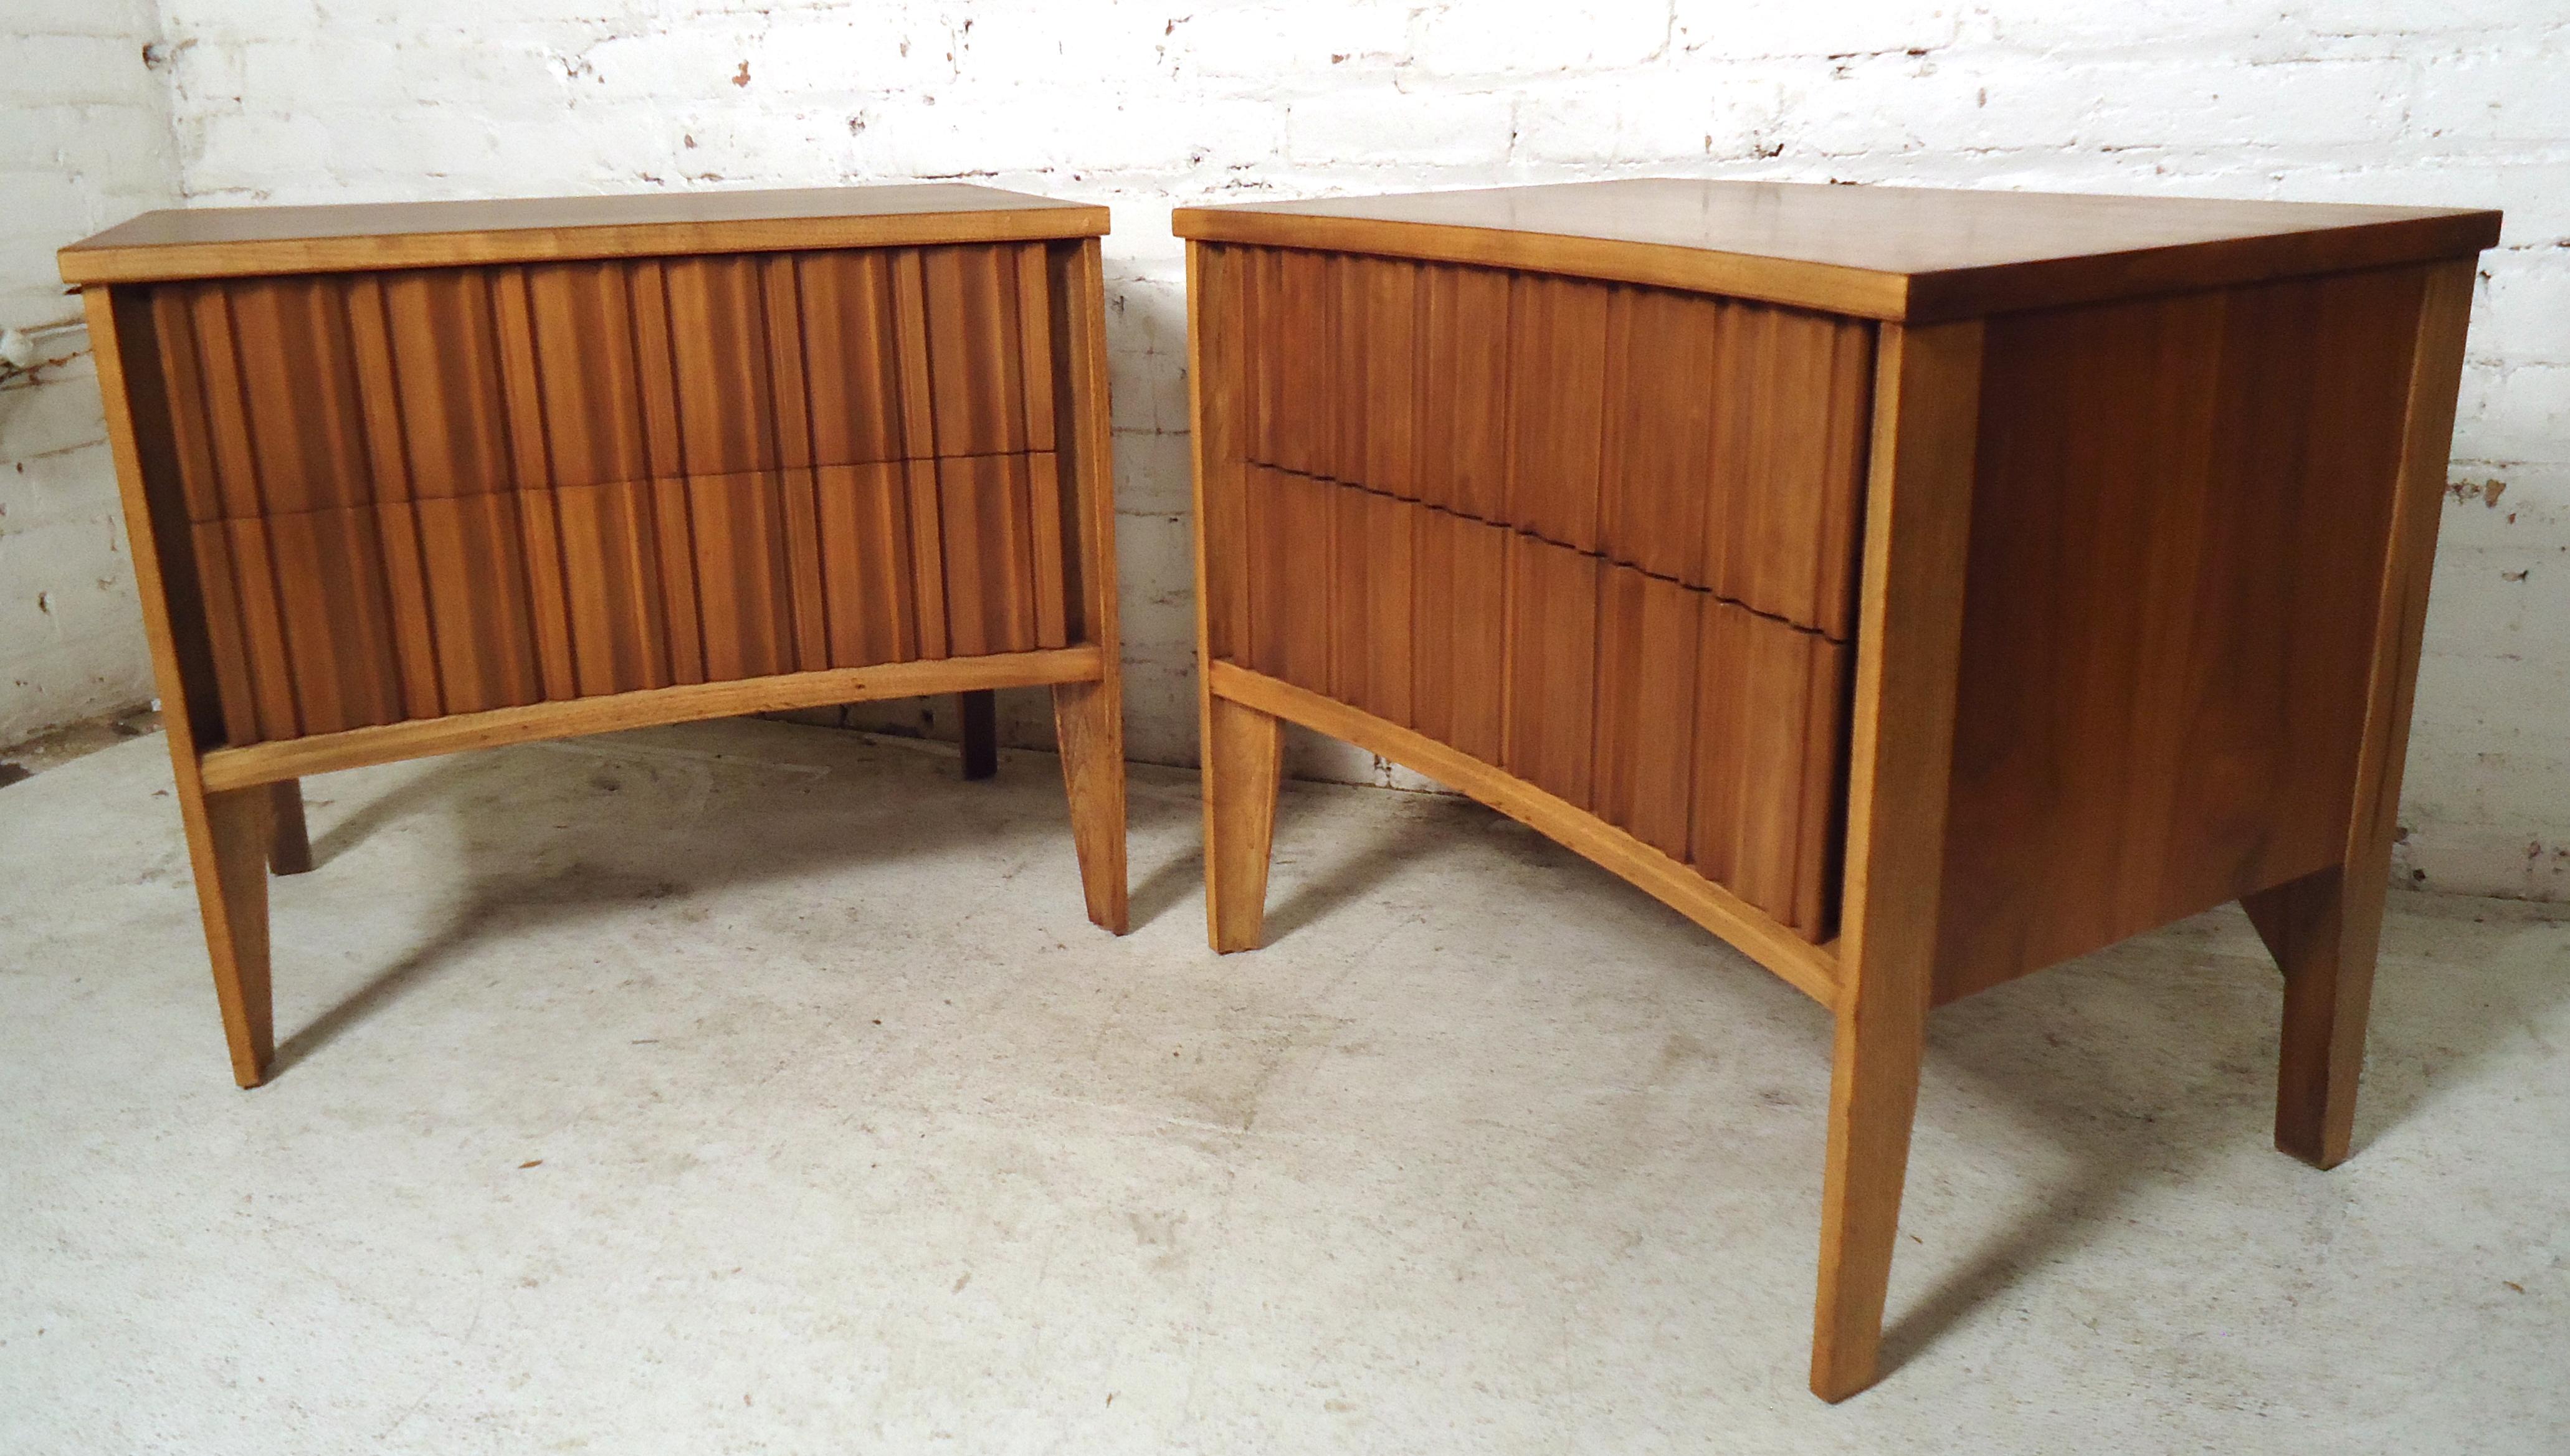 Vintage modern pair of nightstands featuring a uniquely designed drawers and curved front.
(Please confirm item location - NY or NJ - with dealer).